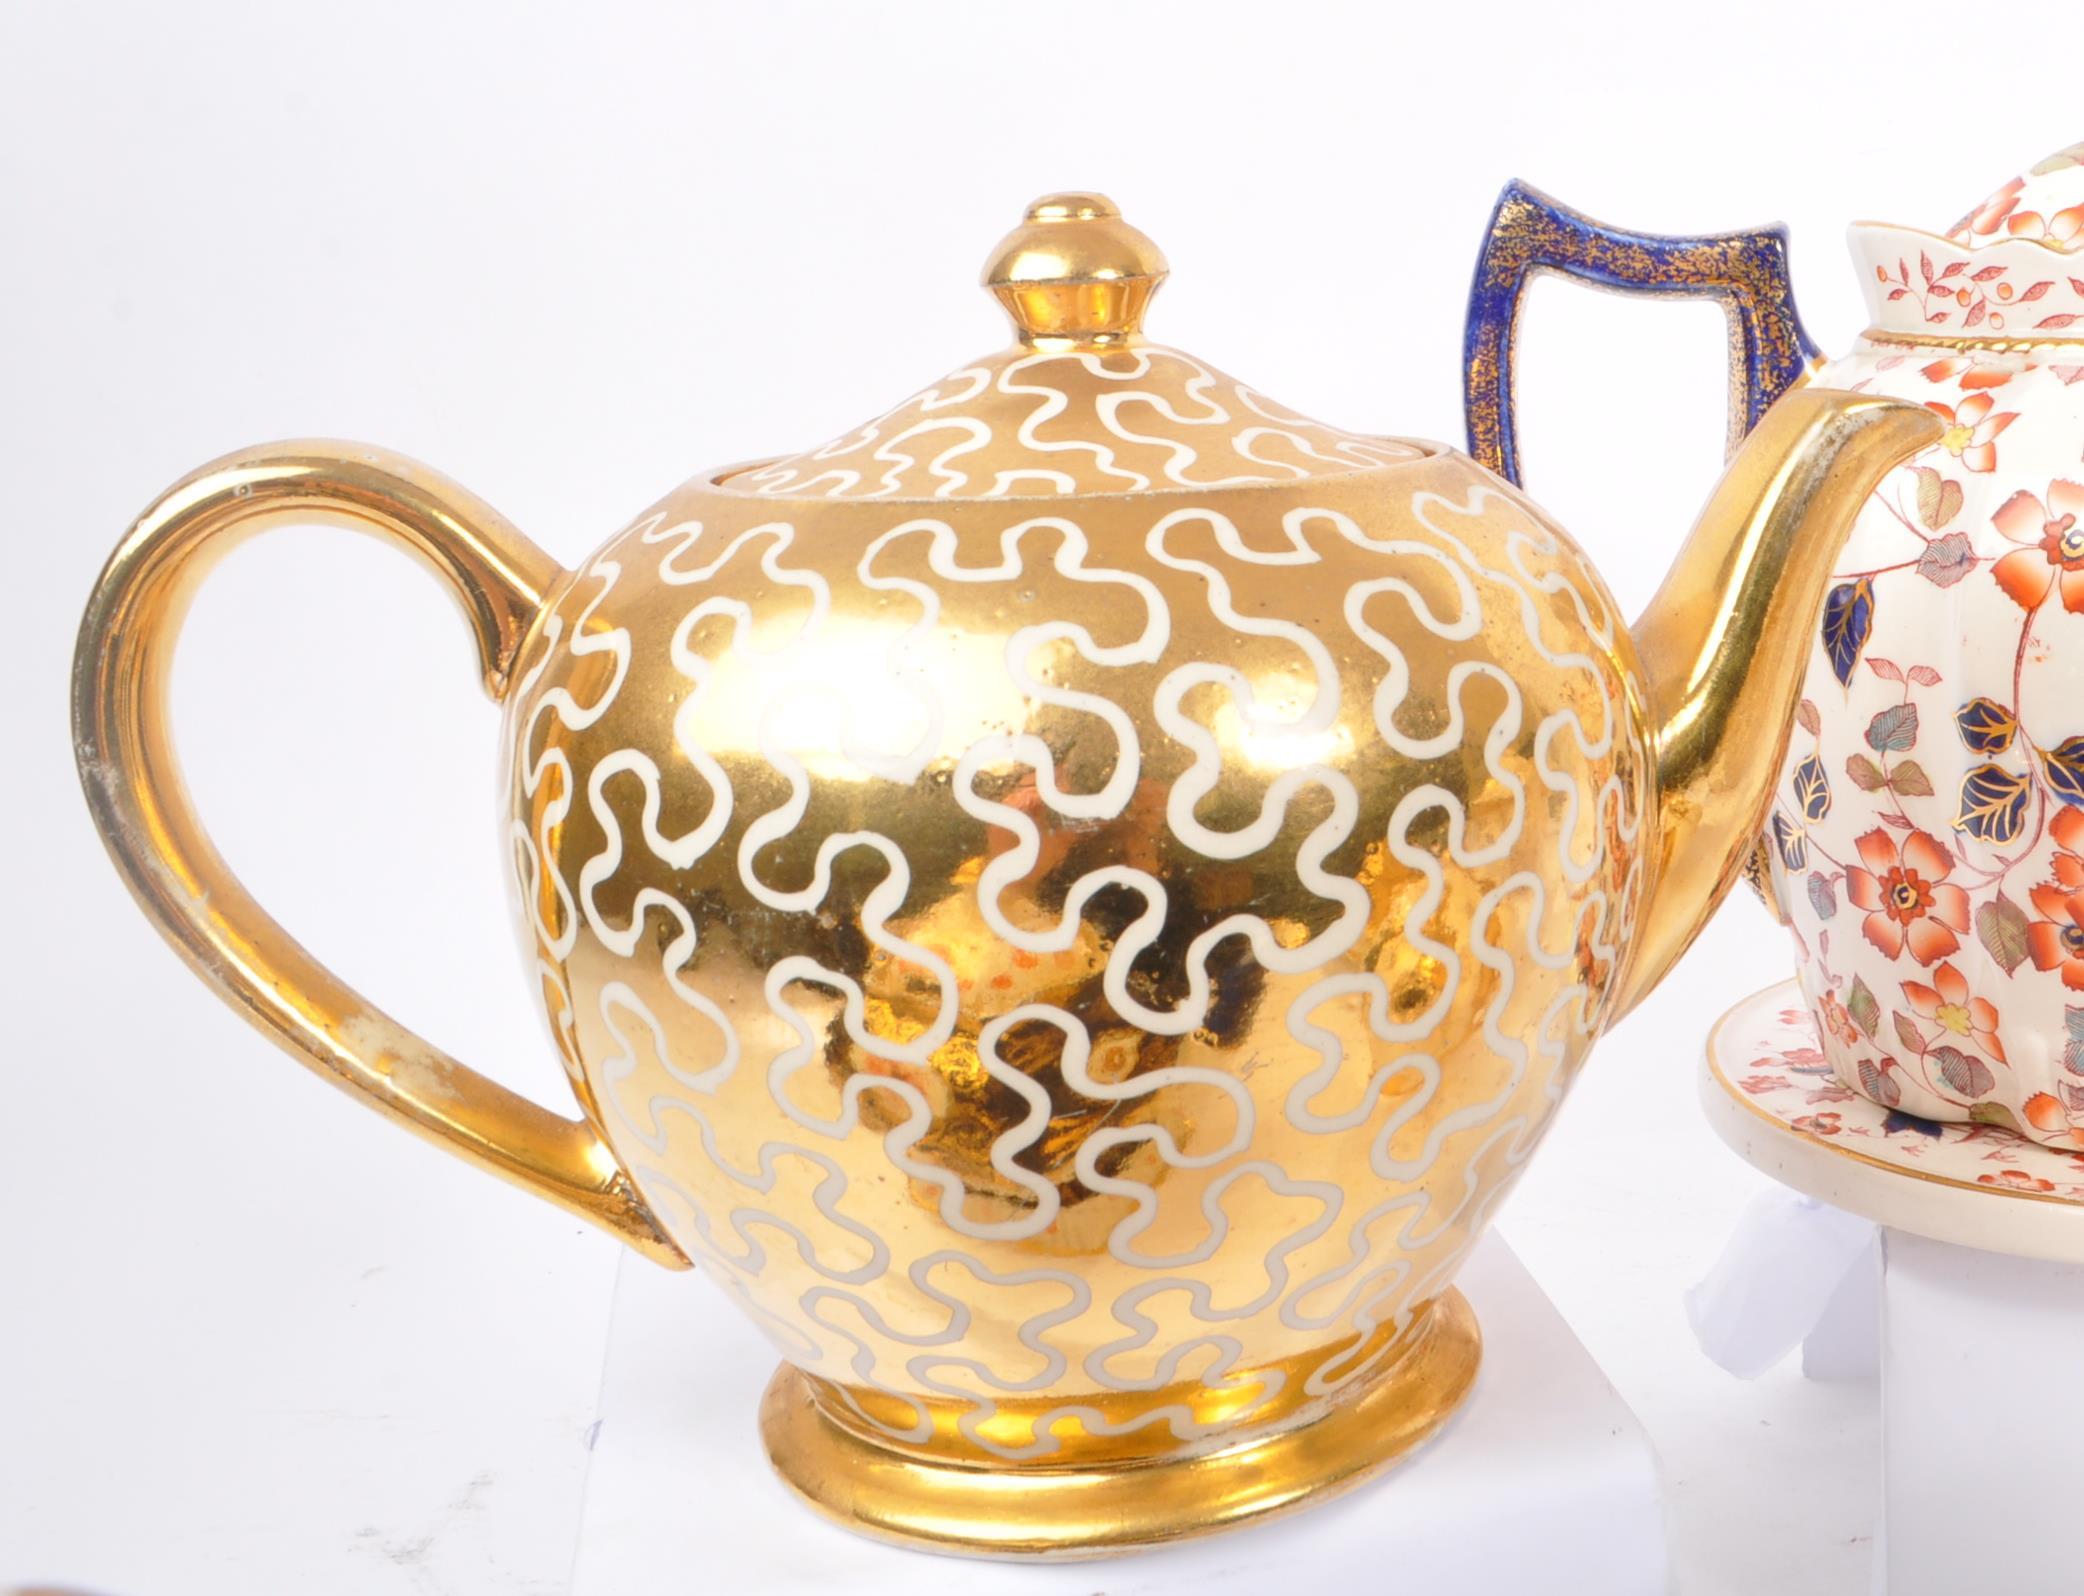 COLLECTION OF VINTAGE 20TH CENTURY CERAMIC TEAPOTS - Image 5 of 10